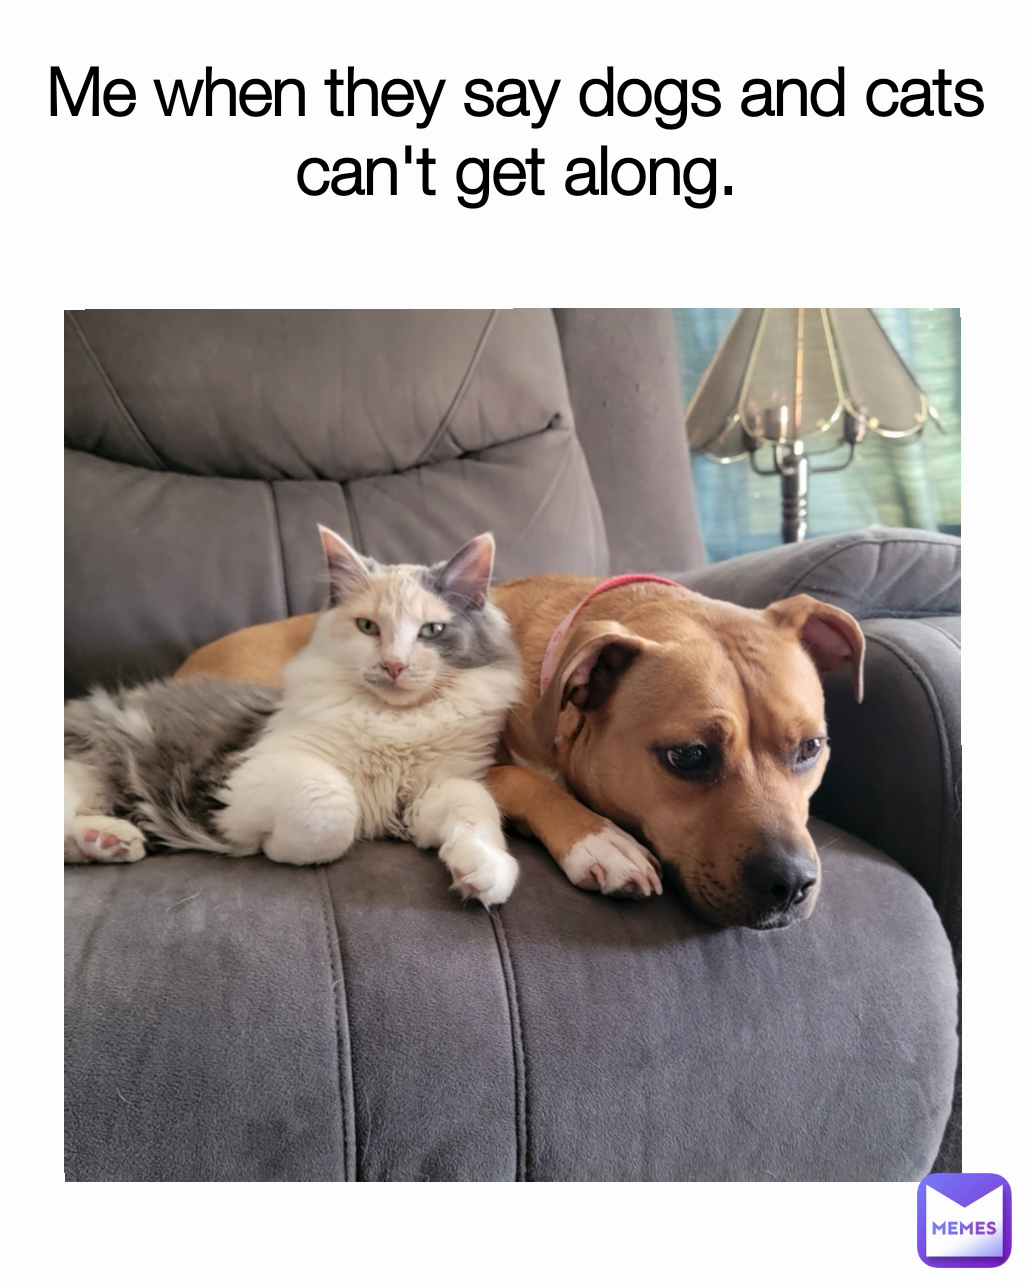 Me when they say dogs and cats can't get along.